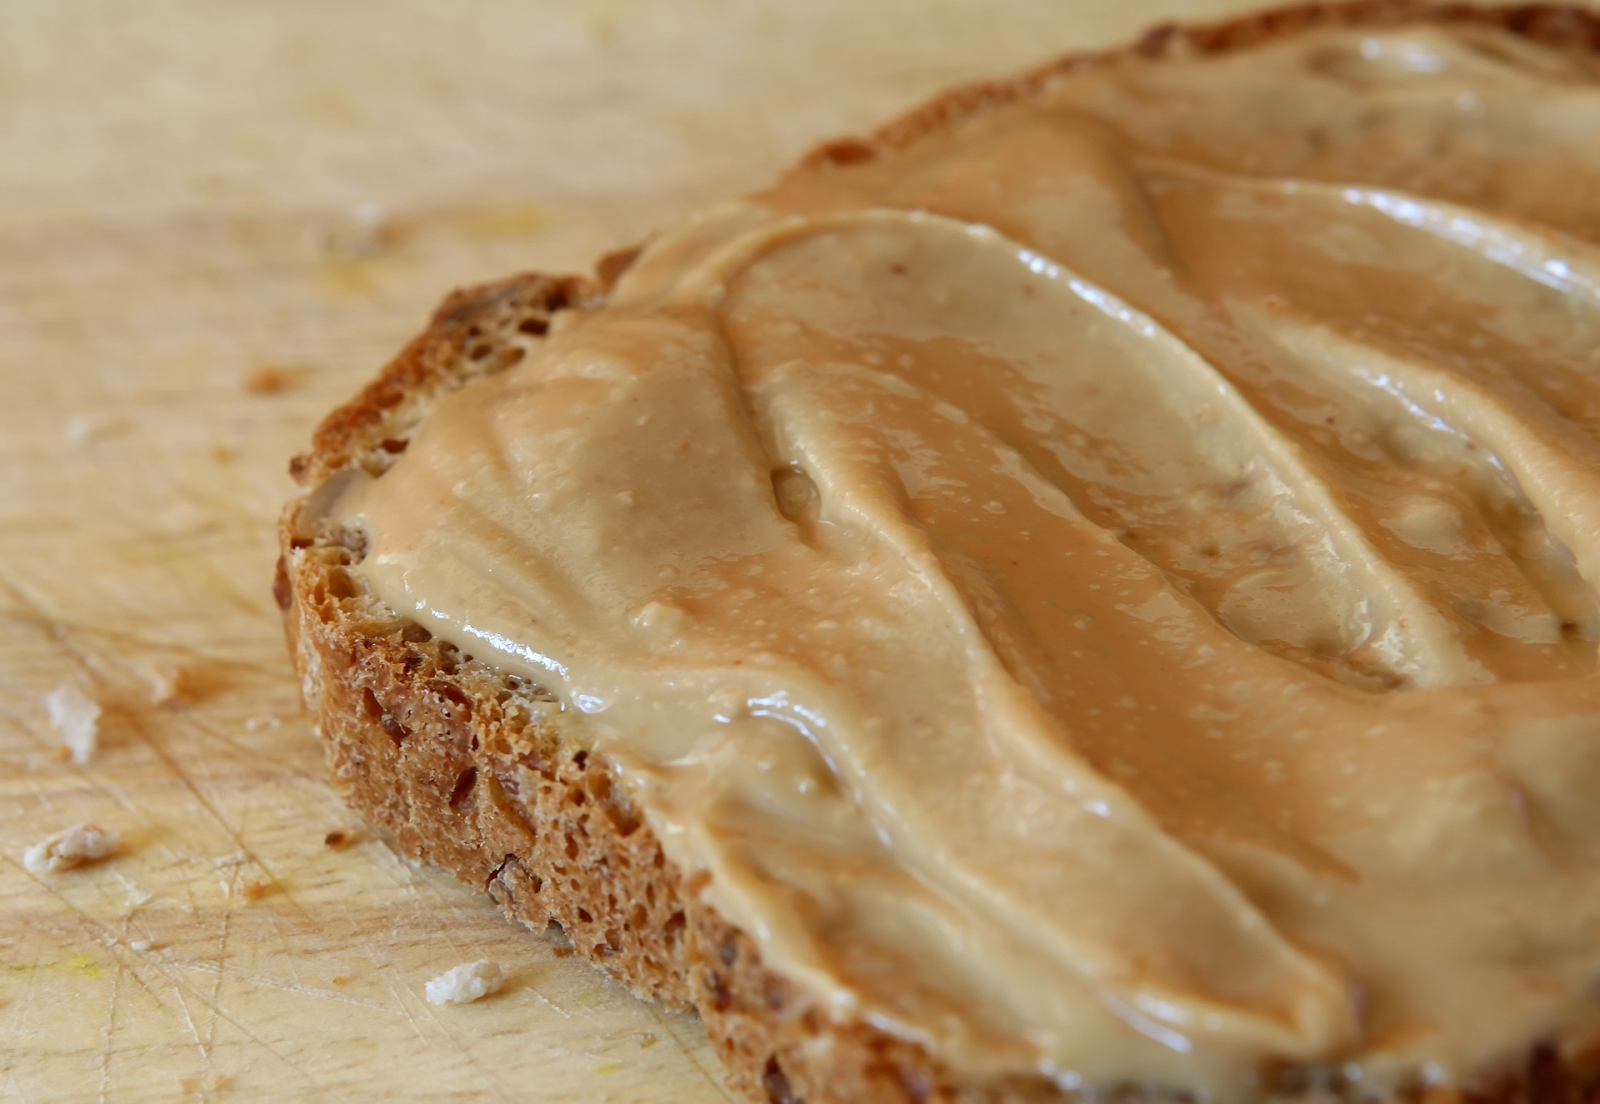 Peanut butter is suitable for vegans. - My Wellbeing Journal.